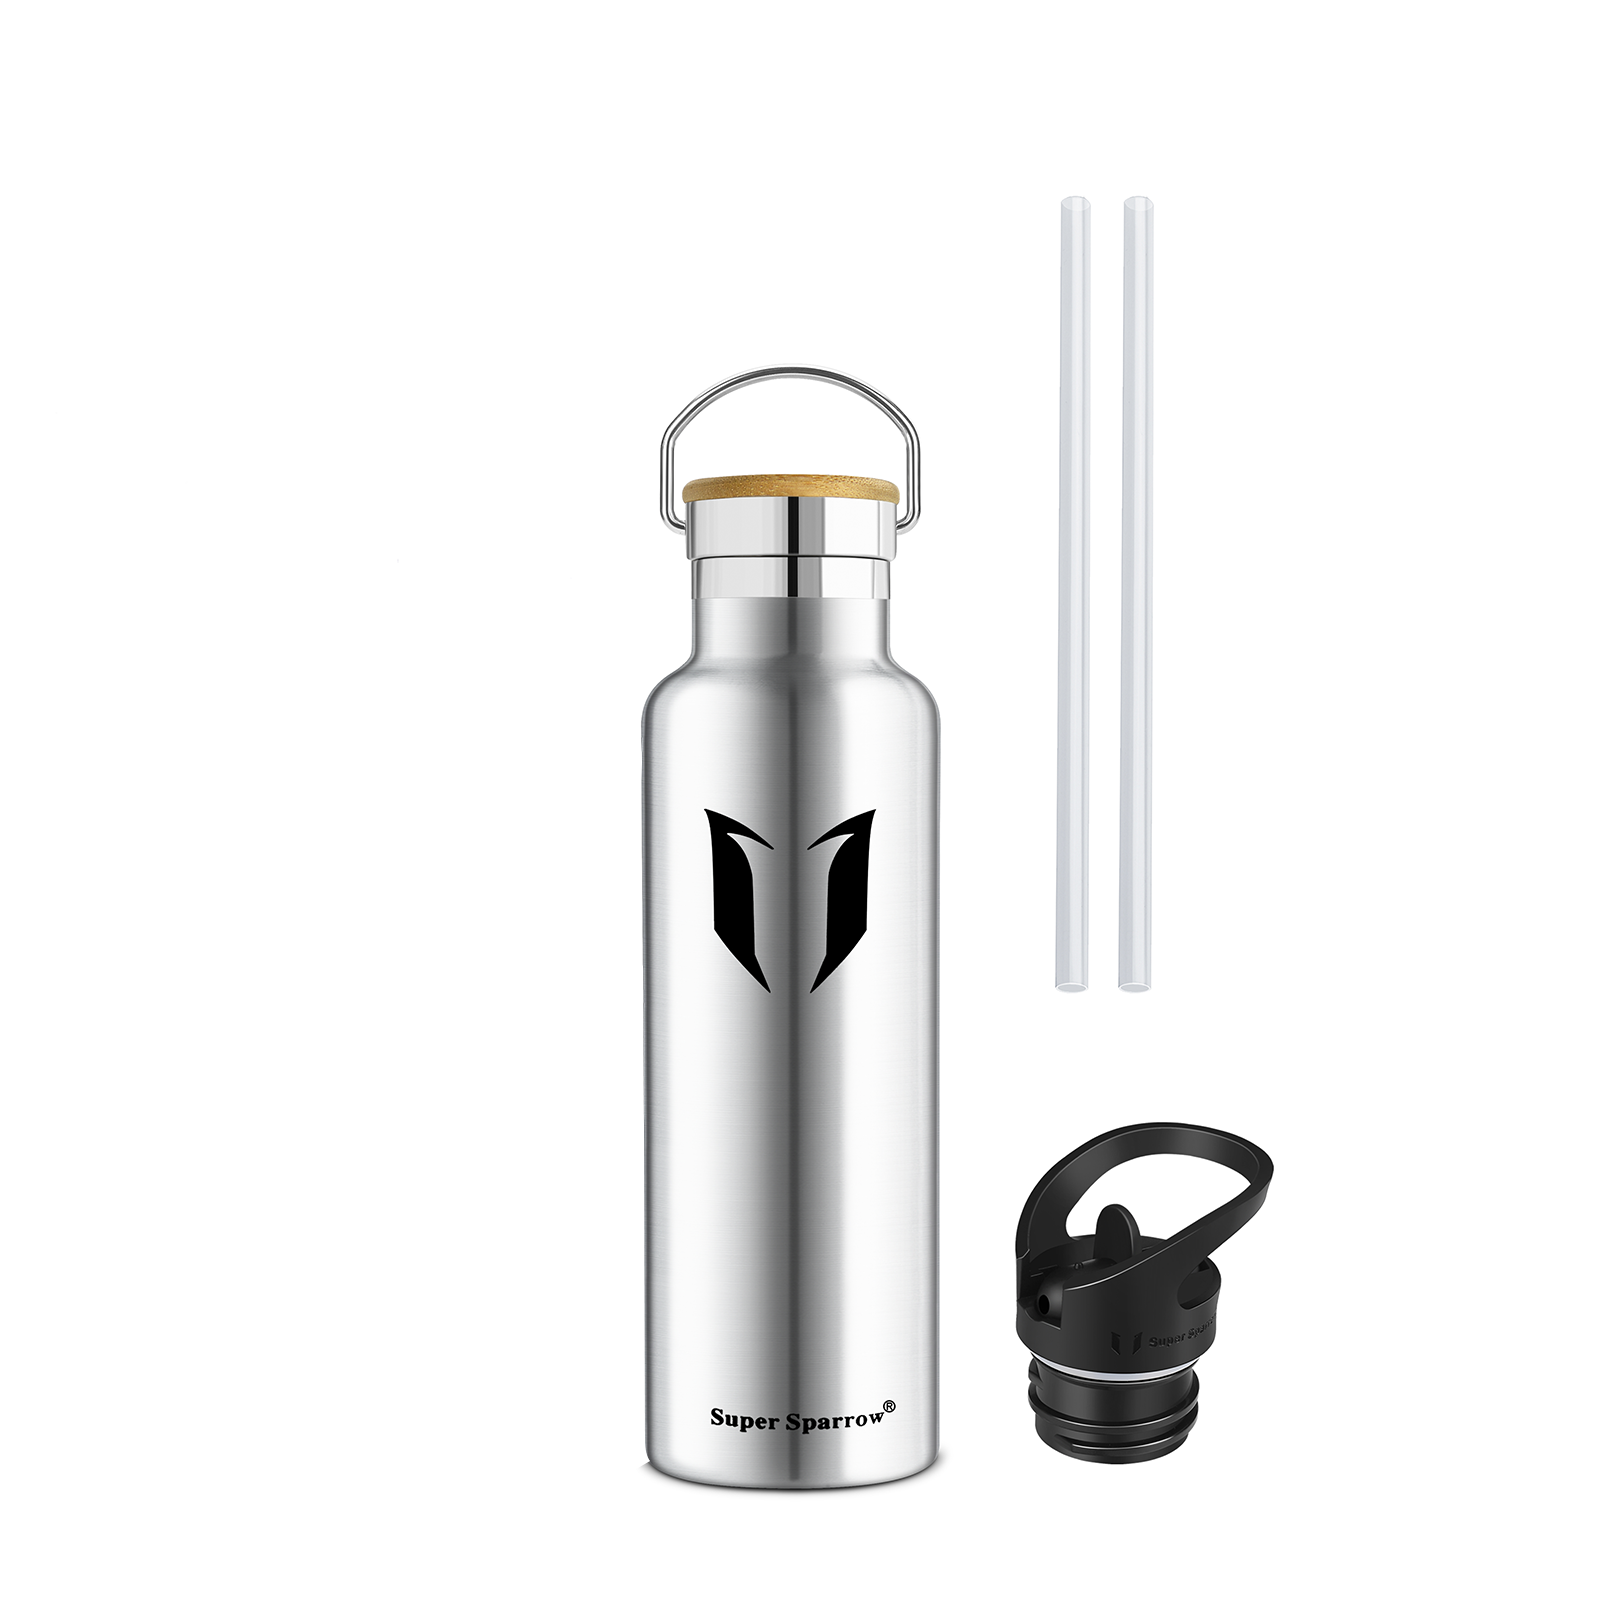 Super Sparrow Water Bottle Stainless Steel - Metal Water Bottle - 500ml -  Insulated Water Bottles - Water Bottle with Straw Lid - BPA Free Kids Water